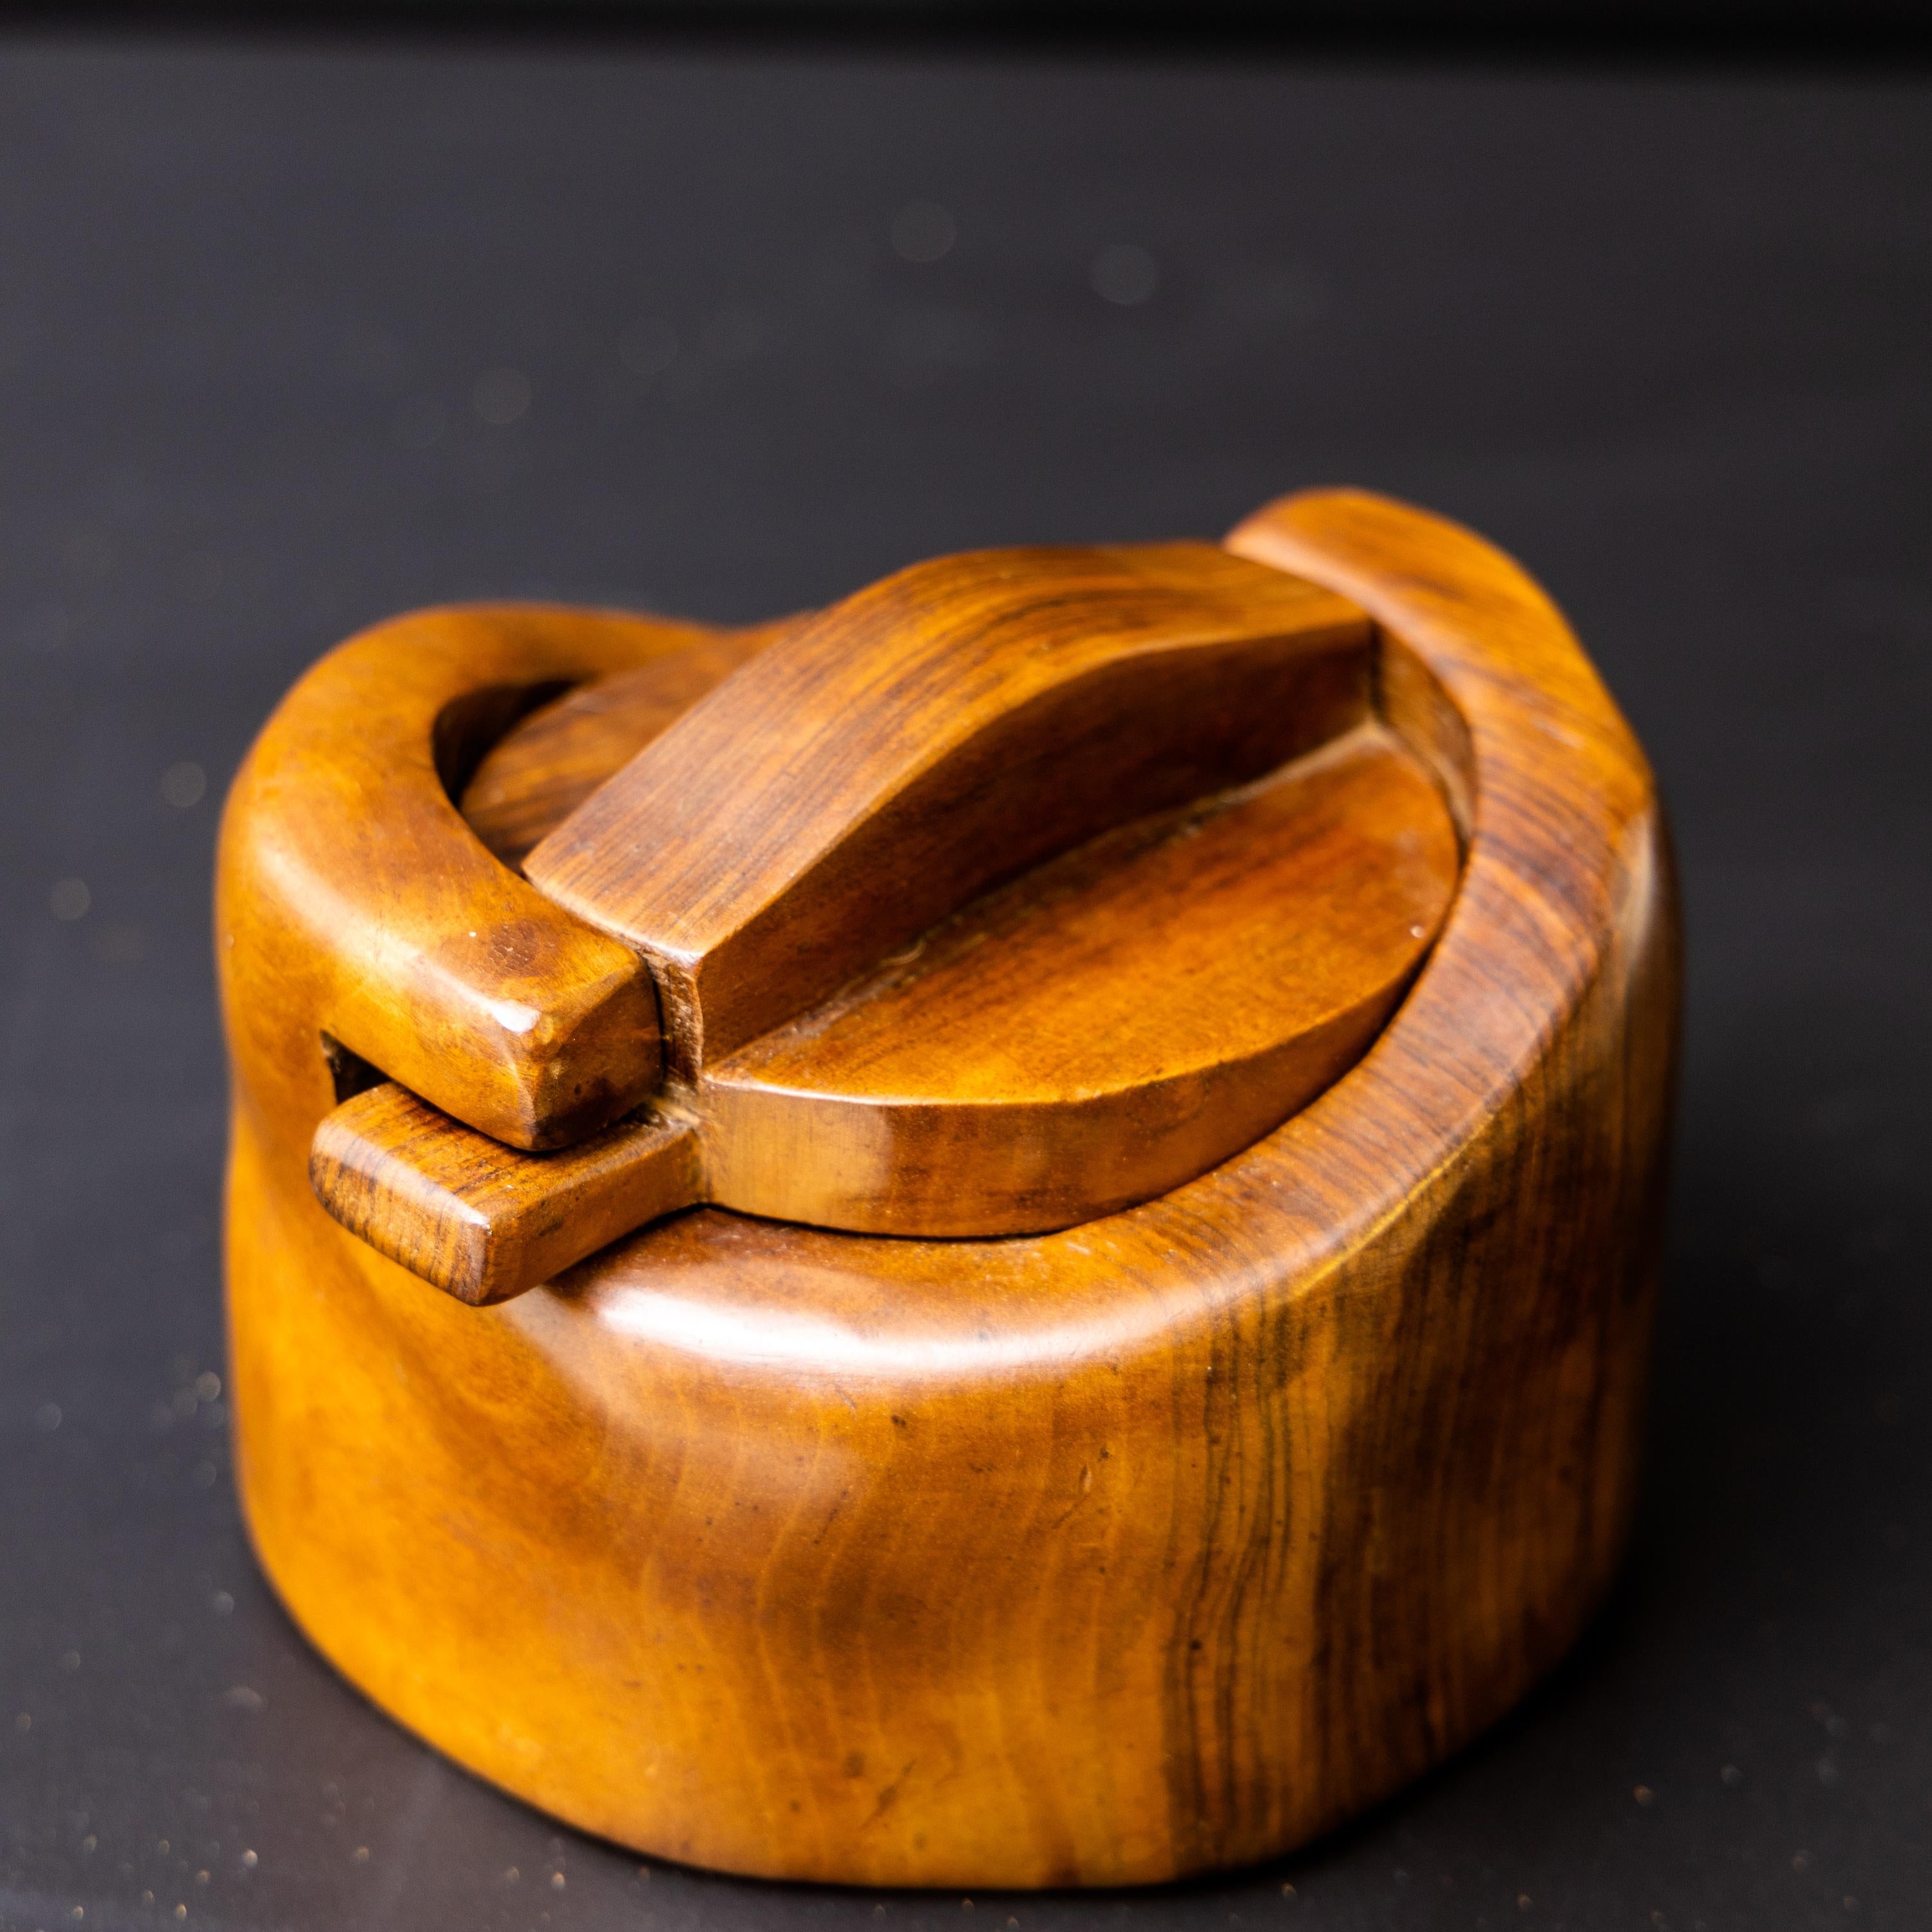 Mid-20th Century Lidded Box in Walnut by Alexandre Noll (1890-1970), France circa 1950 For Sale